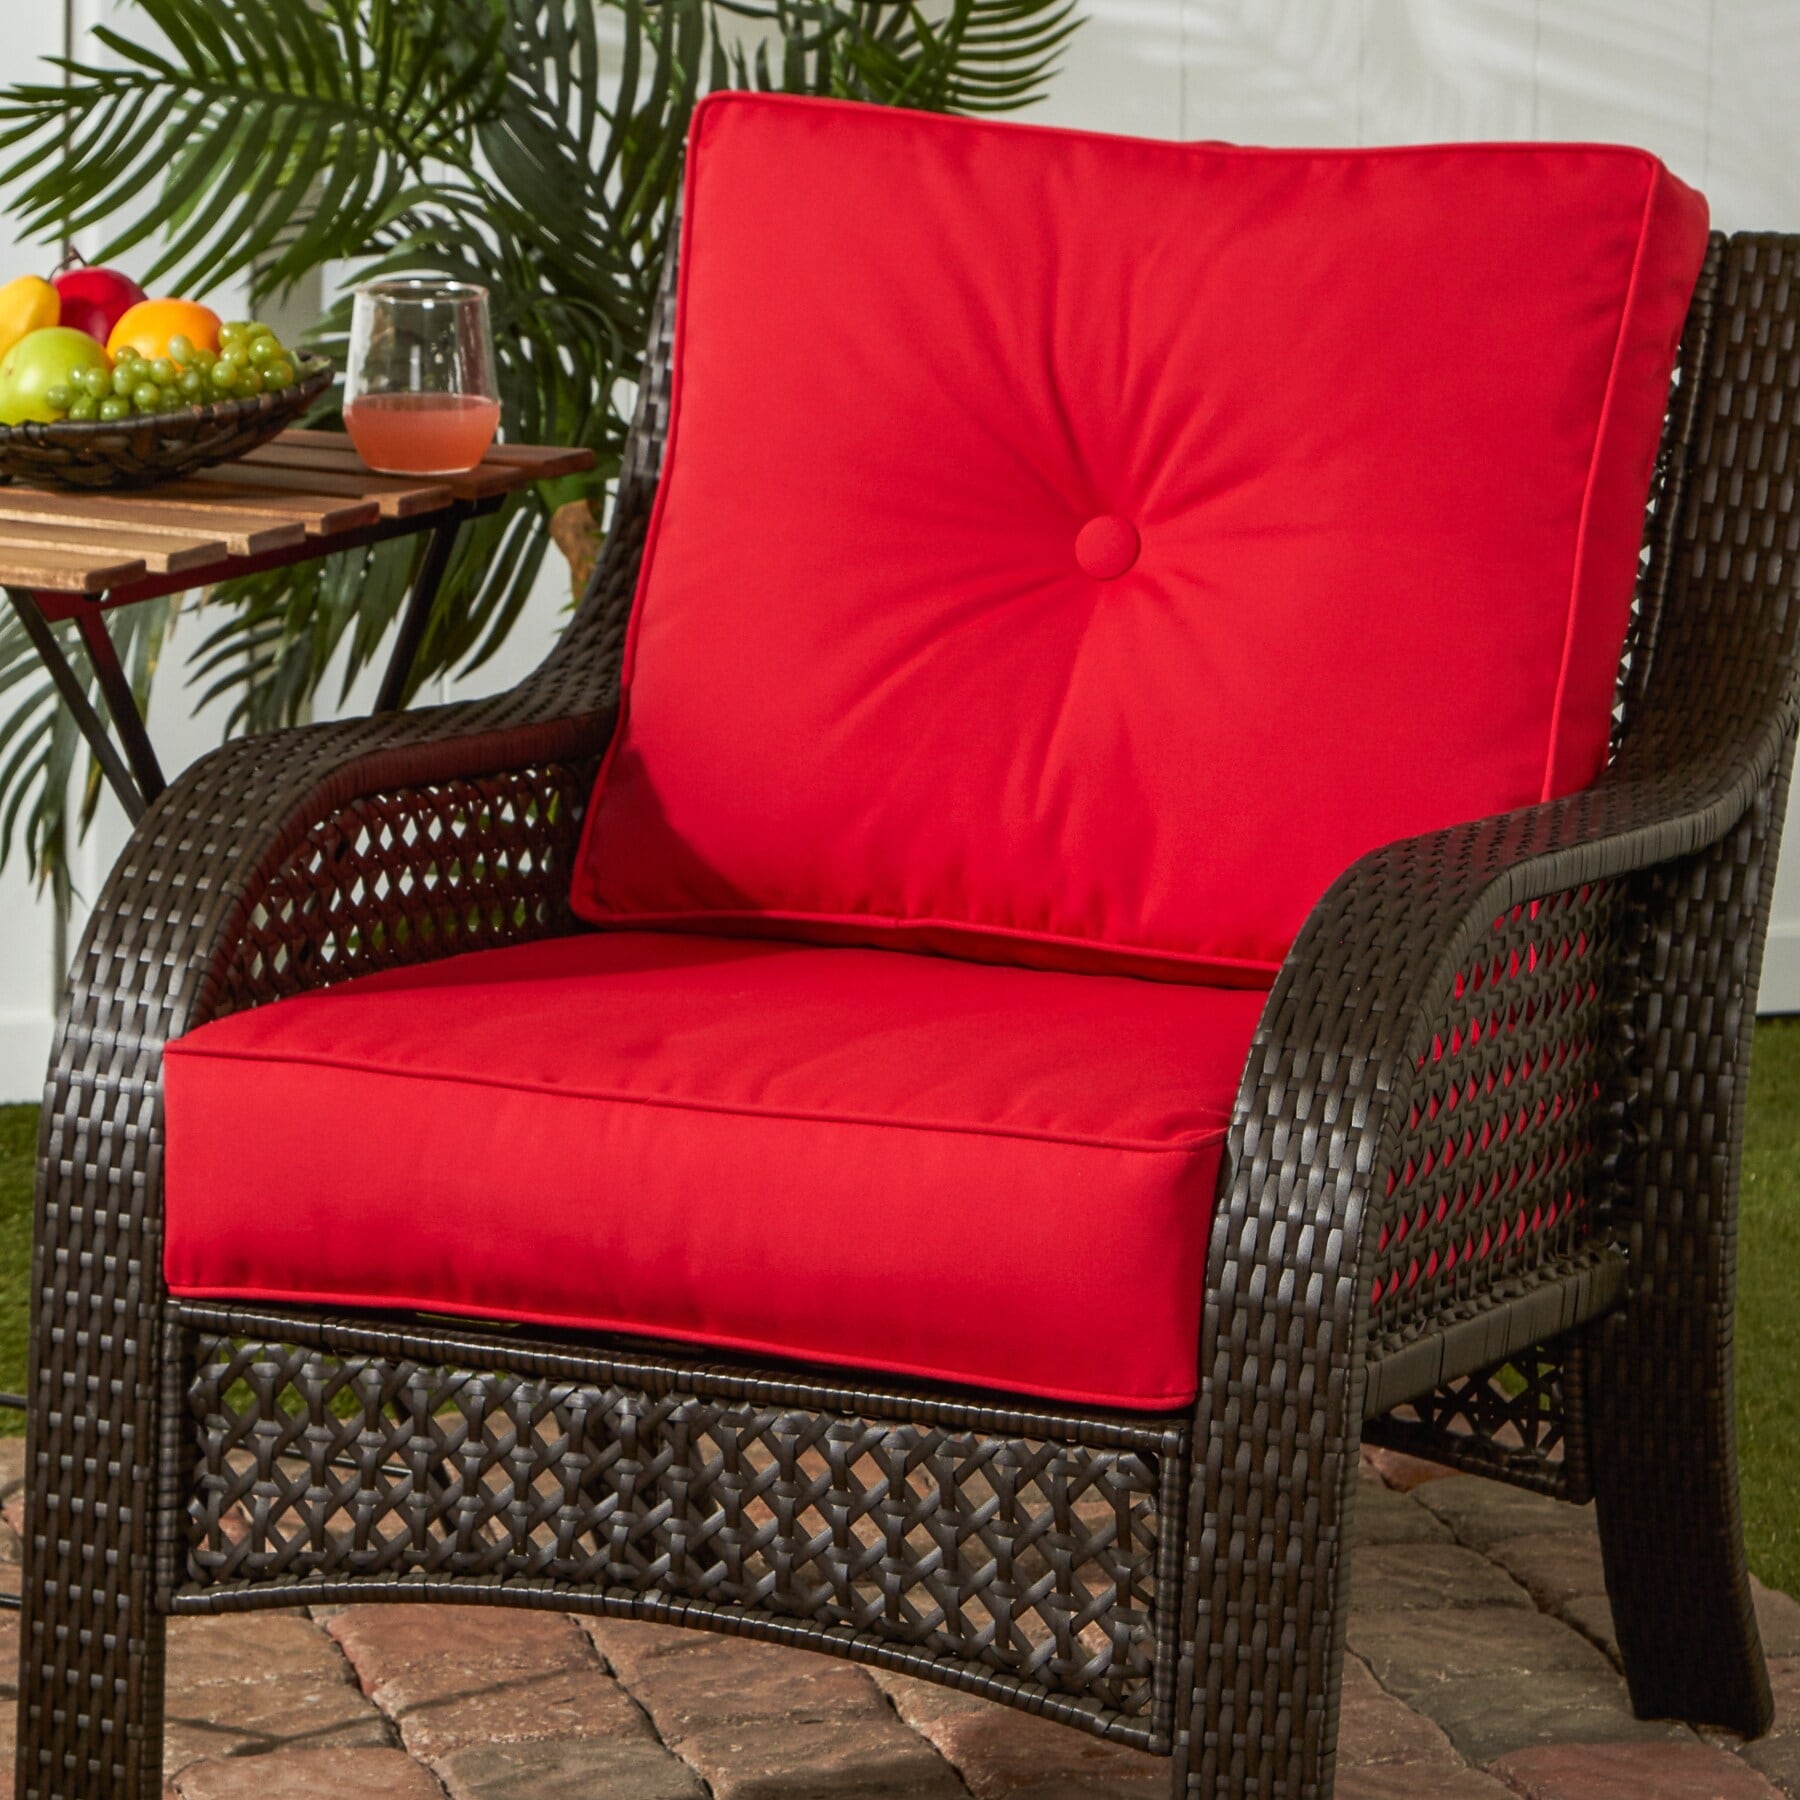 Haven Way Universal Outdoor Deep Seat Lounge Chair Cushion Set - 22x25 - Red